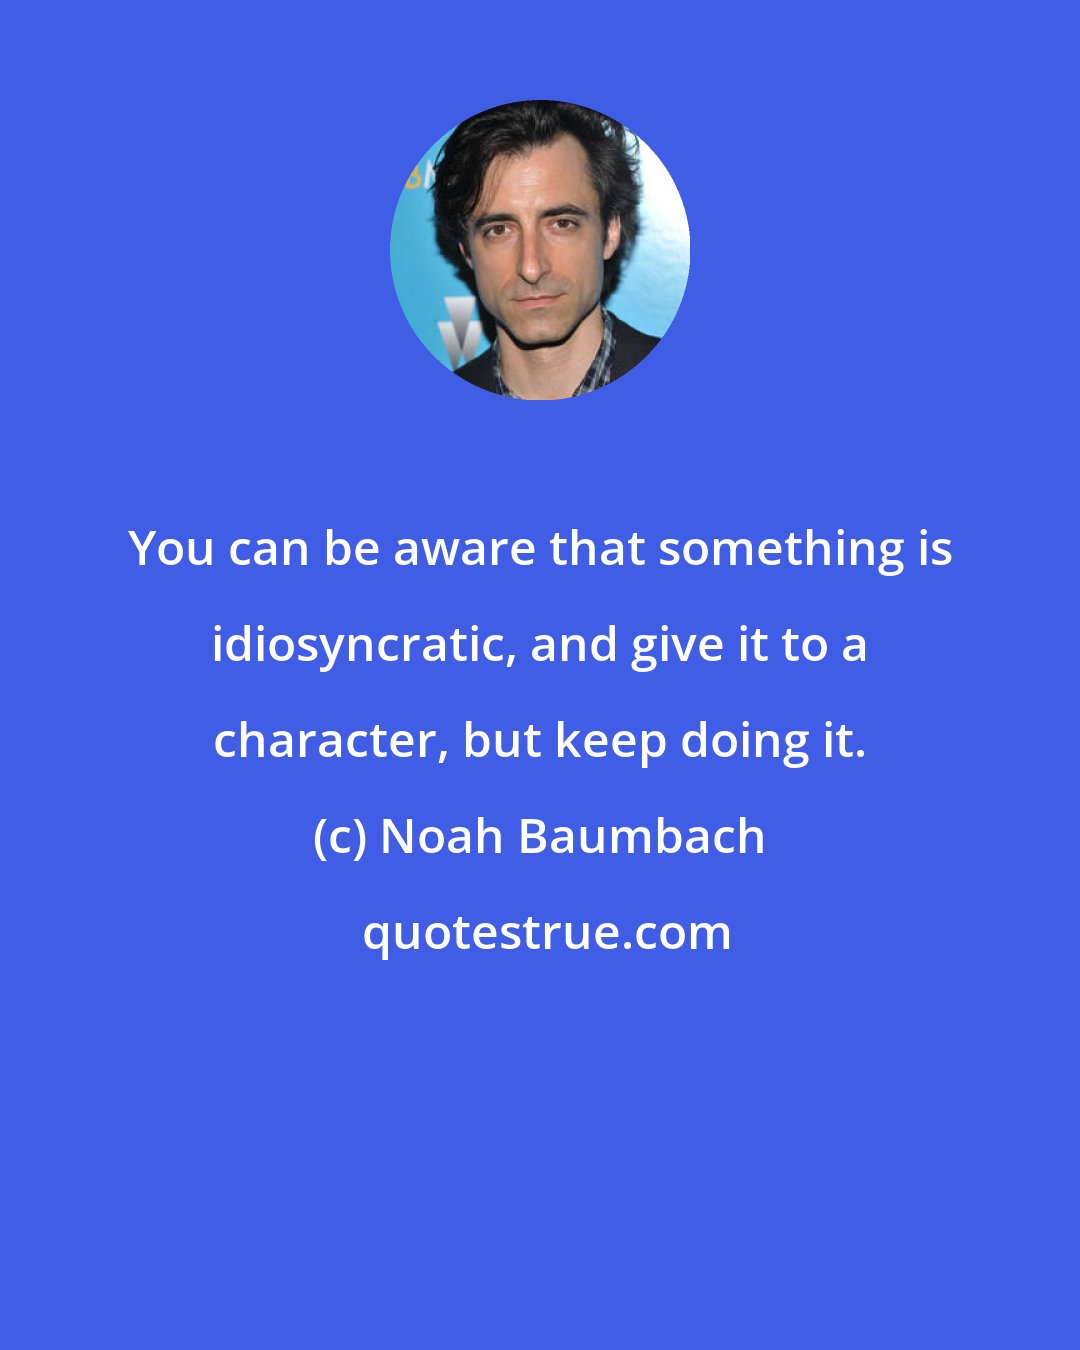 Noah Baumbach: You can be aware that something is idiosyncratic, and give it to a character, but keep doing it.